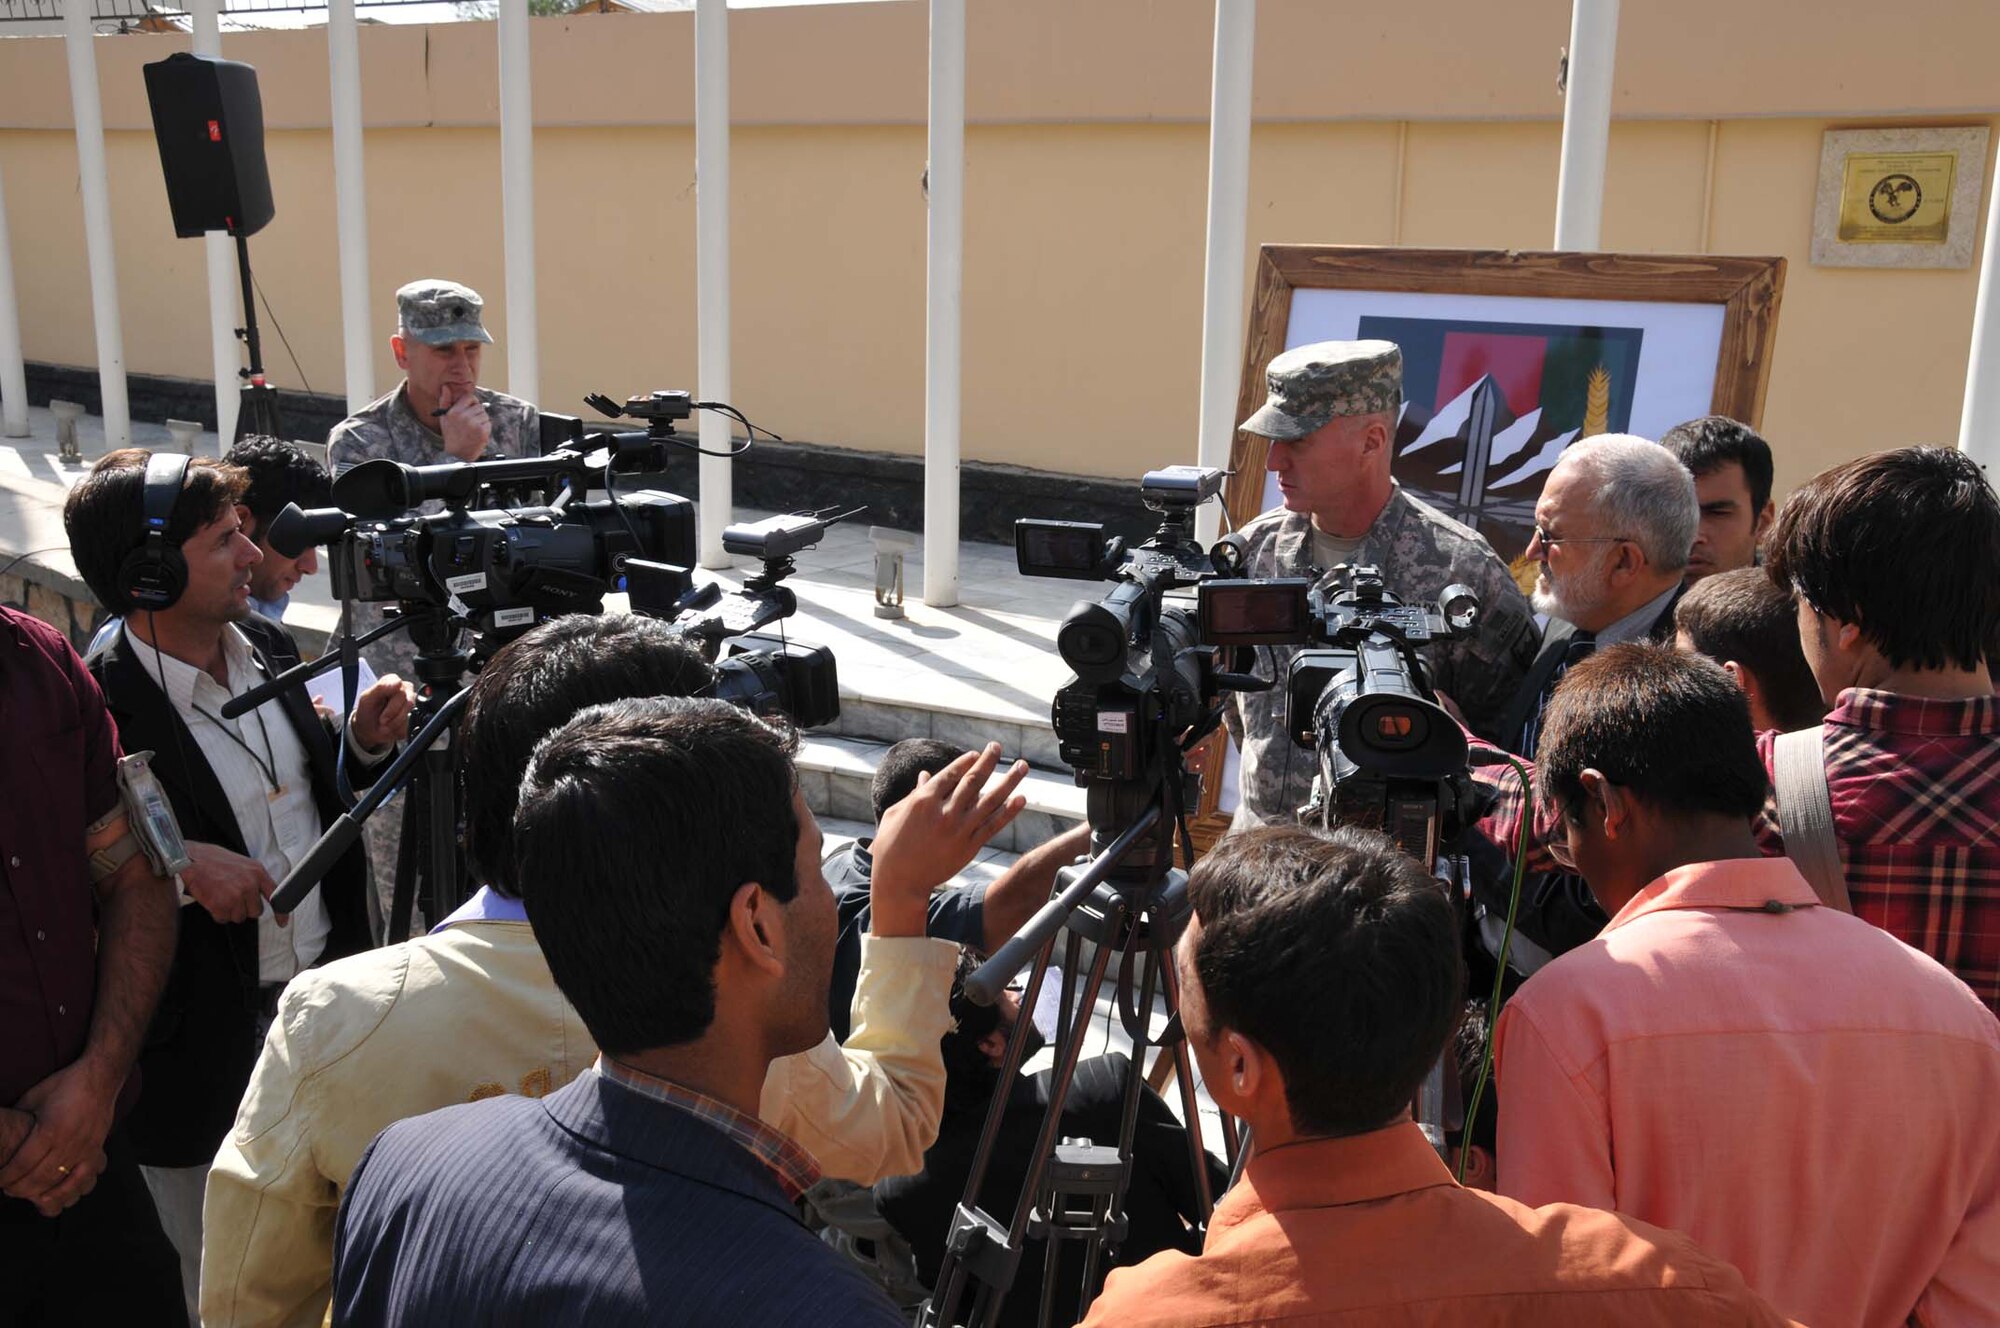 Maj Gen. Robert W. Cone, Combined Security Transition Command-Afghanistan commanding general, speaks to the press following a shoulder sleeve insignia ceremony at Camp Eggers in Kabul, Afghanistan. (Photo by Mass Communication Specialist Seaman Tim Newborn, USN) (Released)